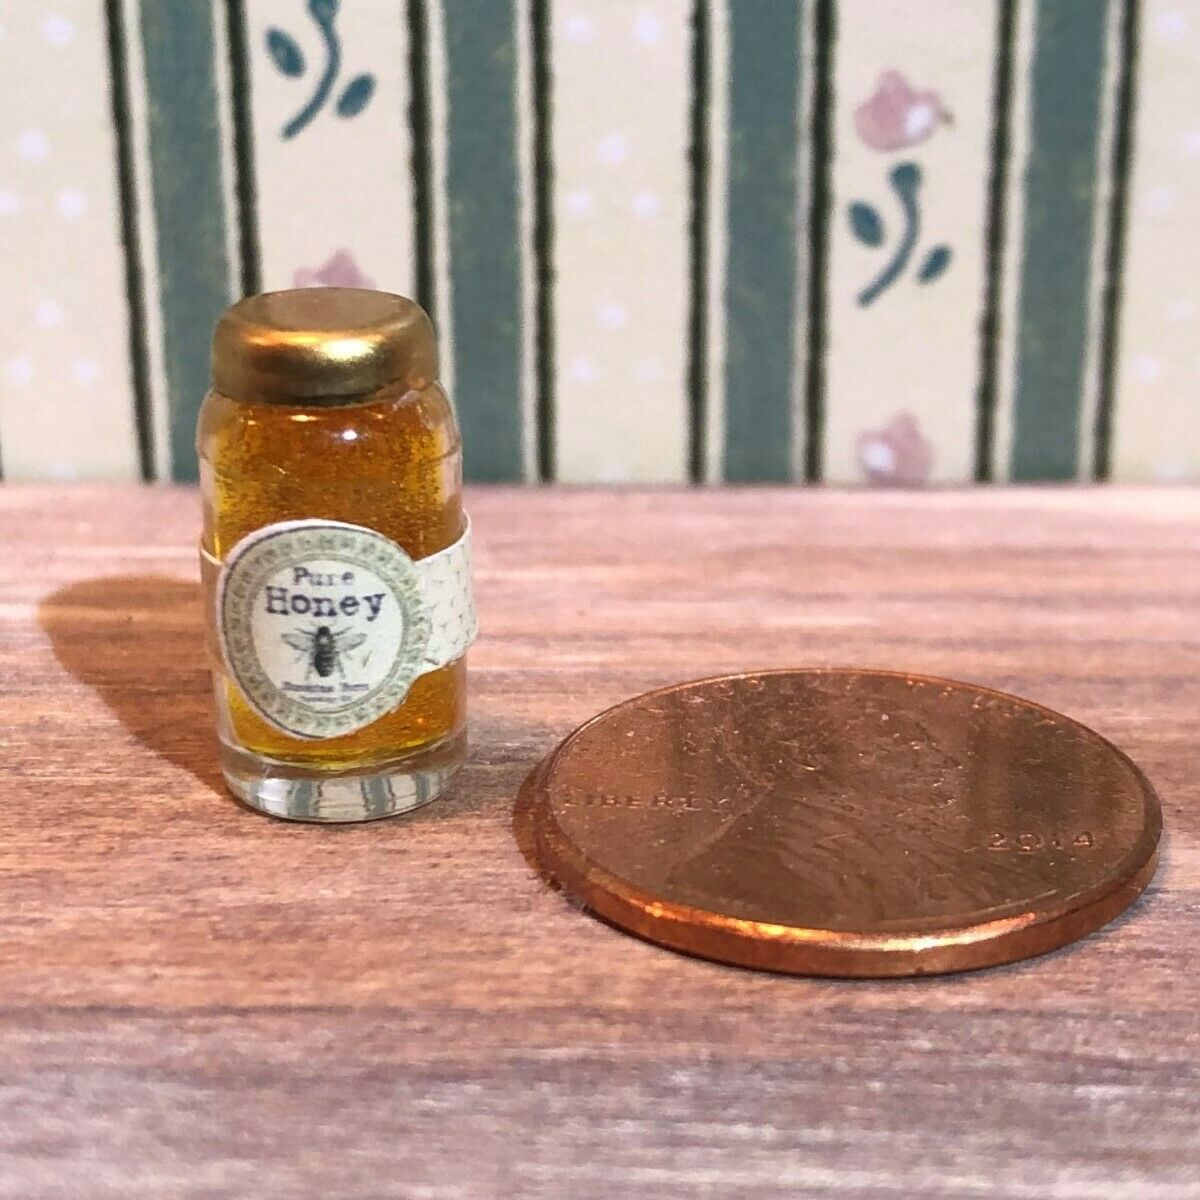 Dollhouse Miniature Food 1:12 - Jar Of Honey With Label